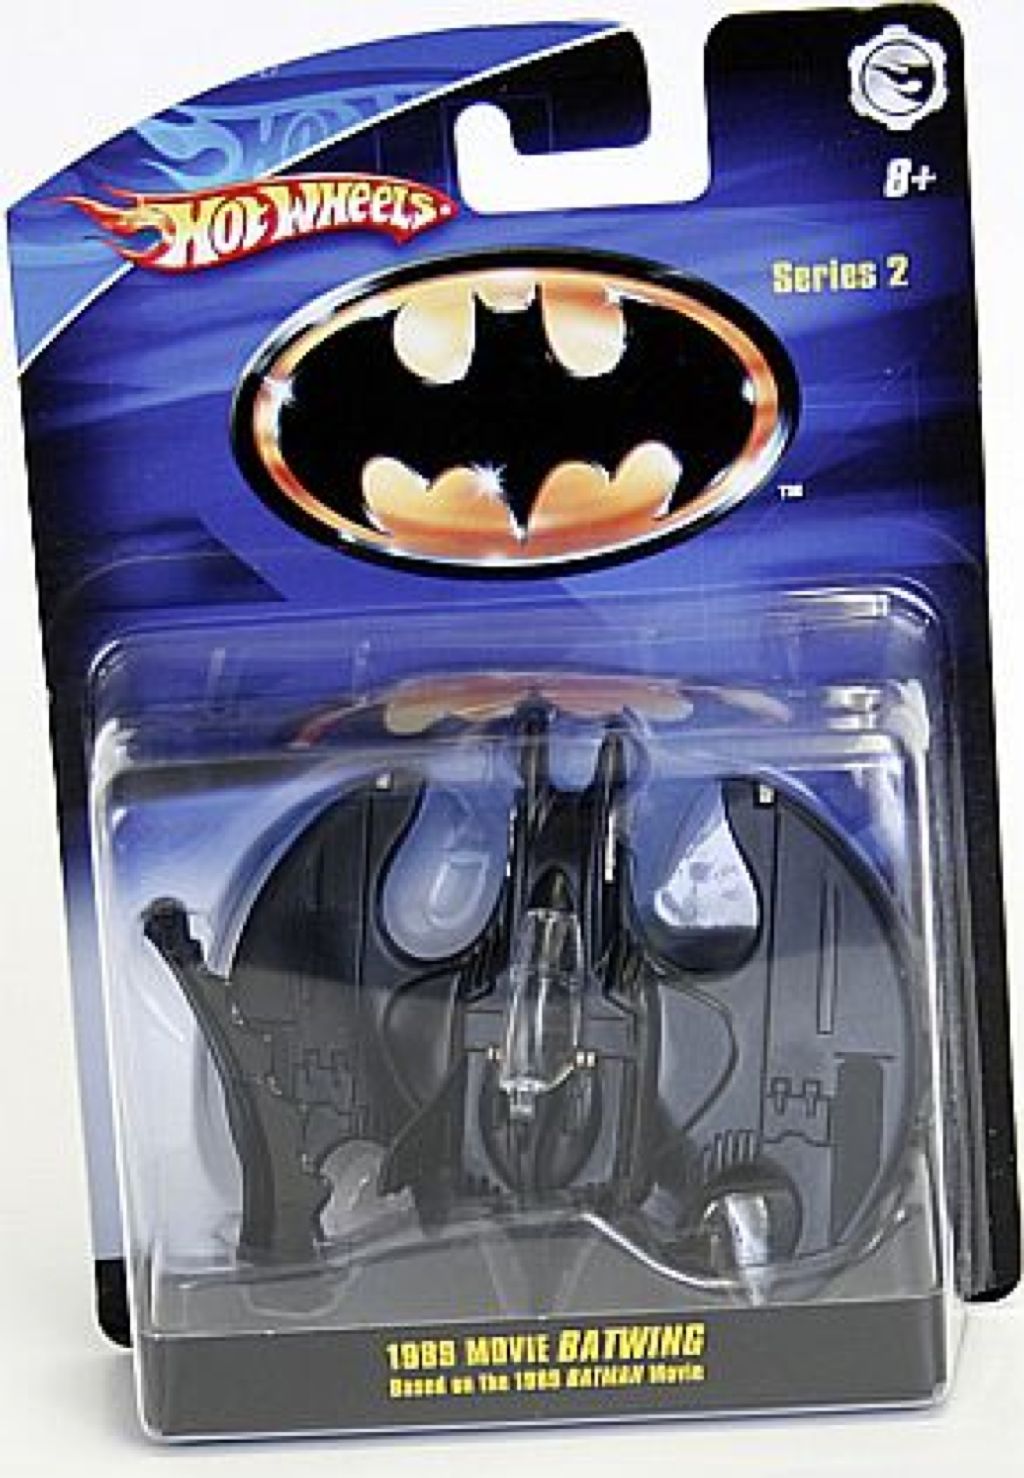 1989 Batman™ Movie Batwing 1:50 Scale - Batman Series 1:50 Scale toy car collectible [Barcode 027084740165] - Main Image 2